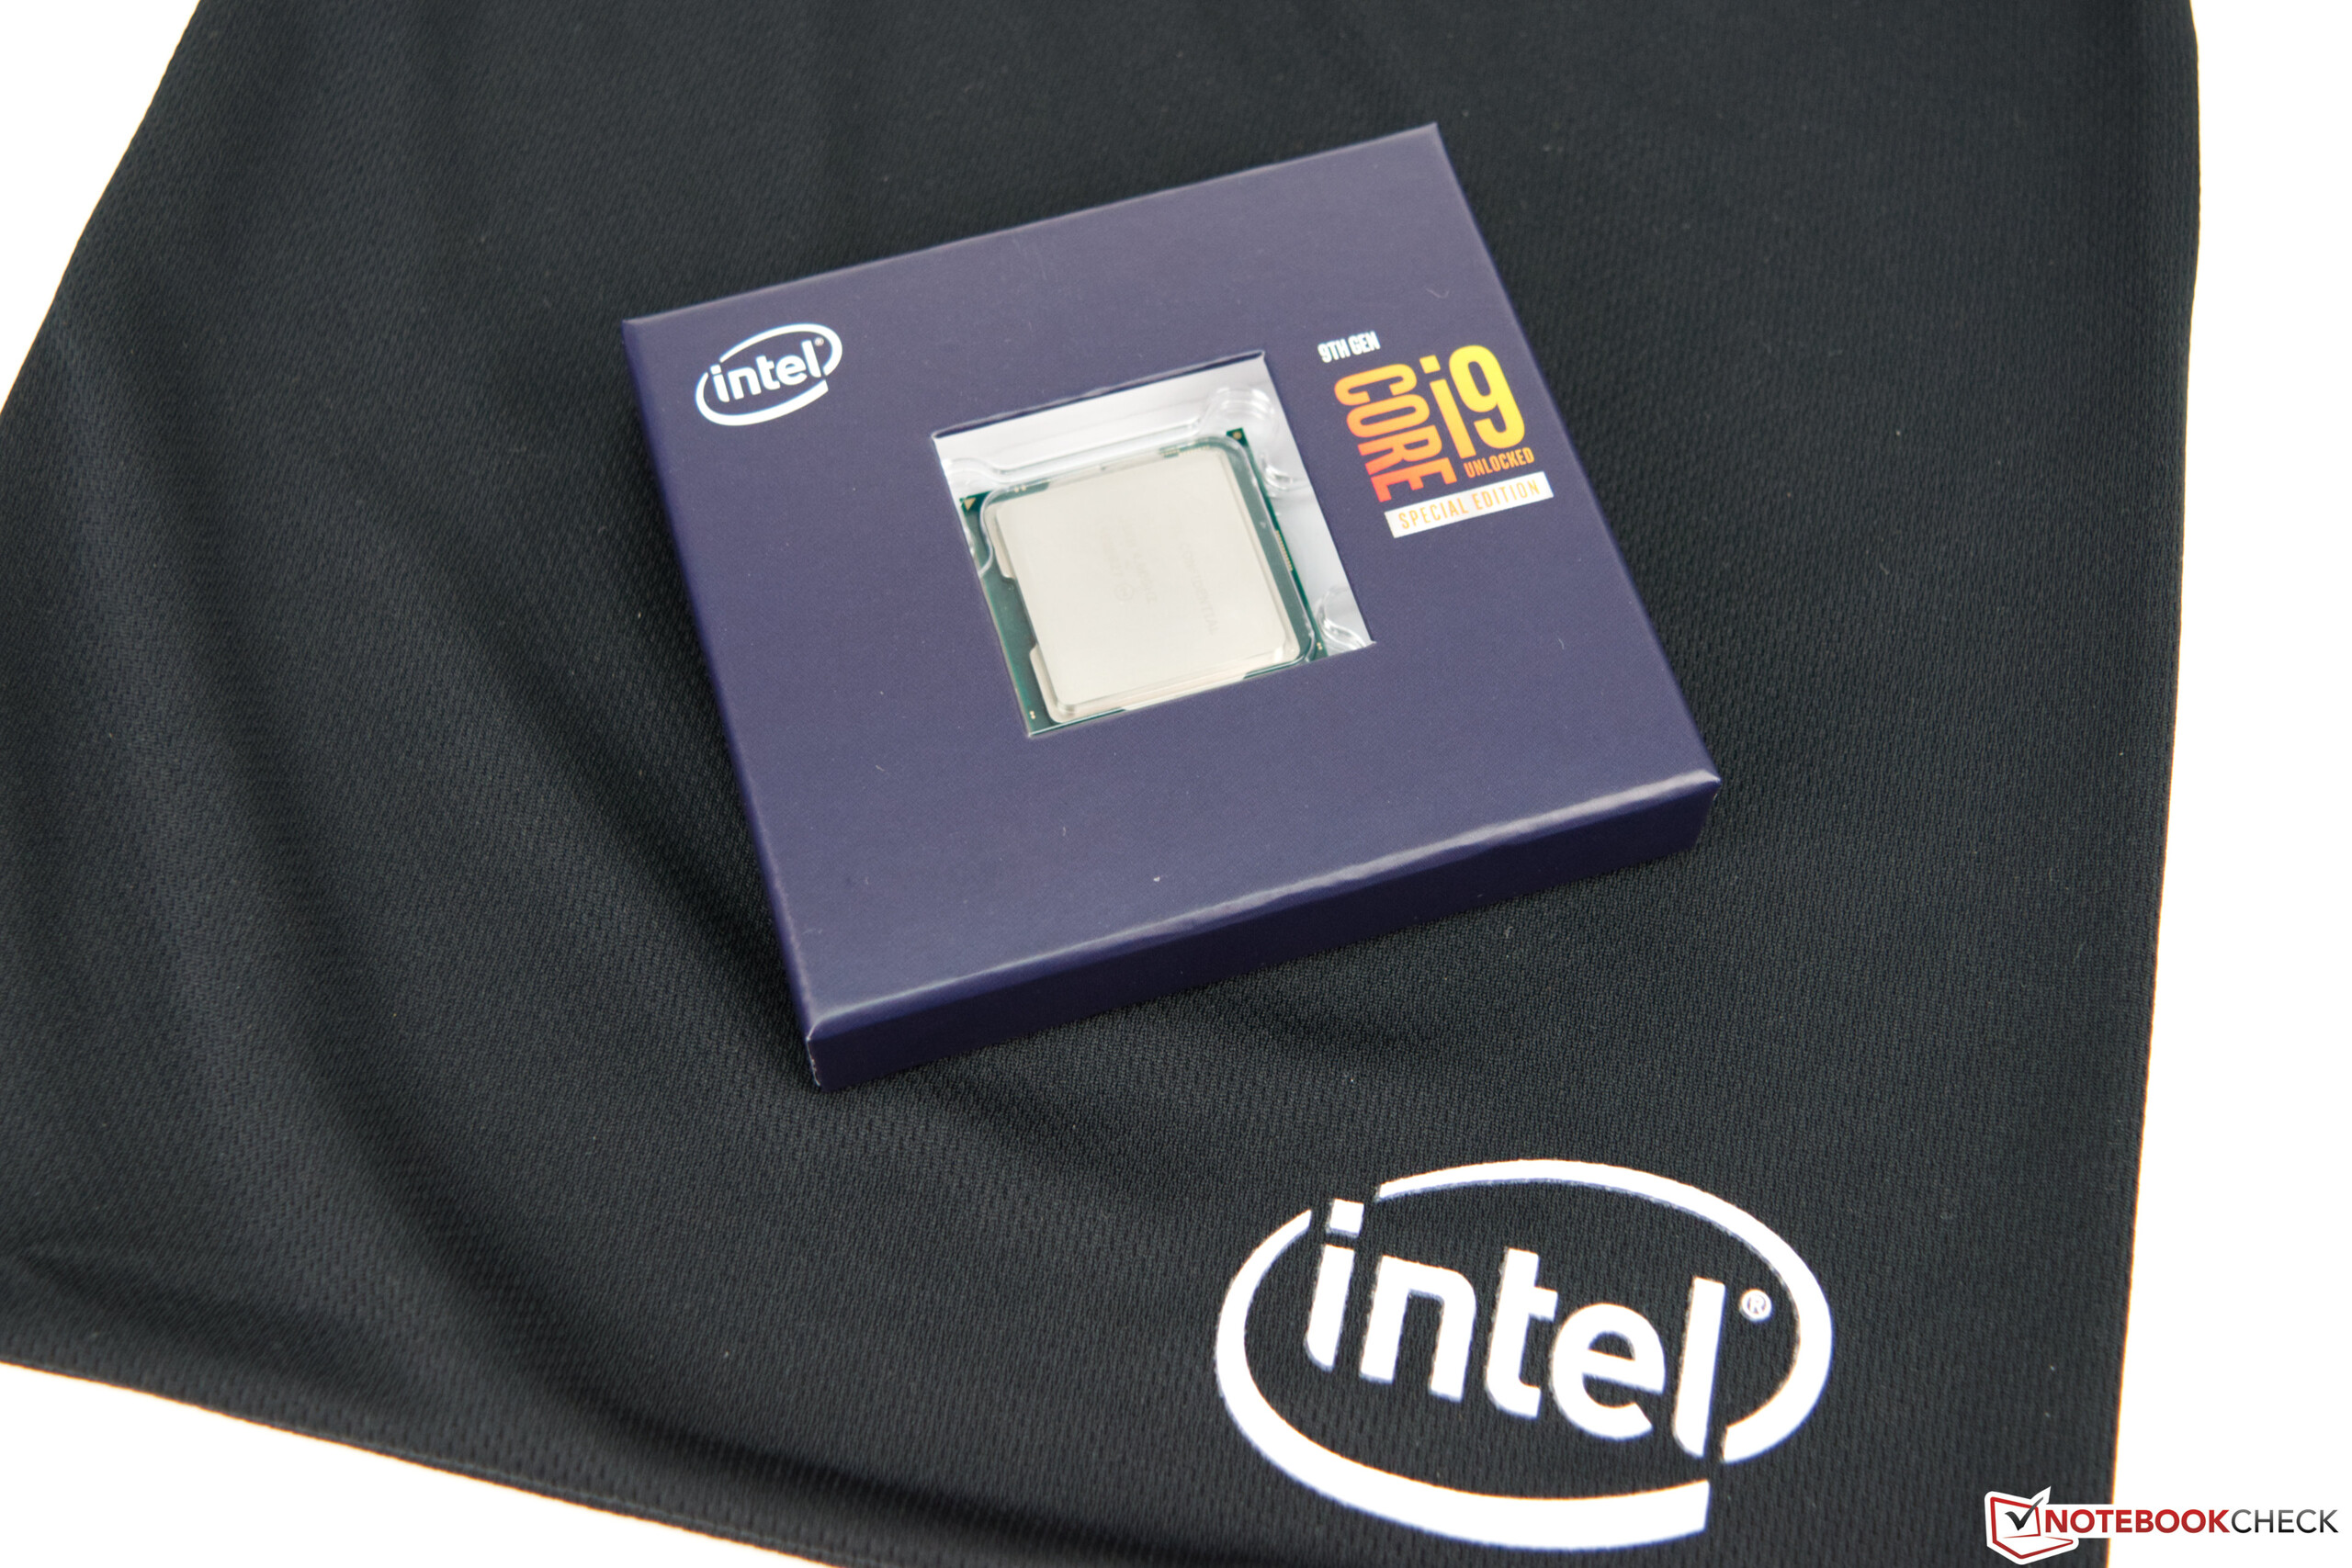 Intel Core i9-9900KS Special Edition Review: More power, less point